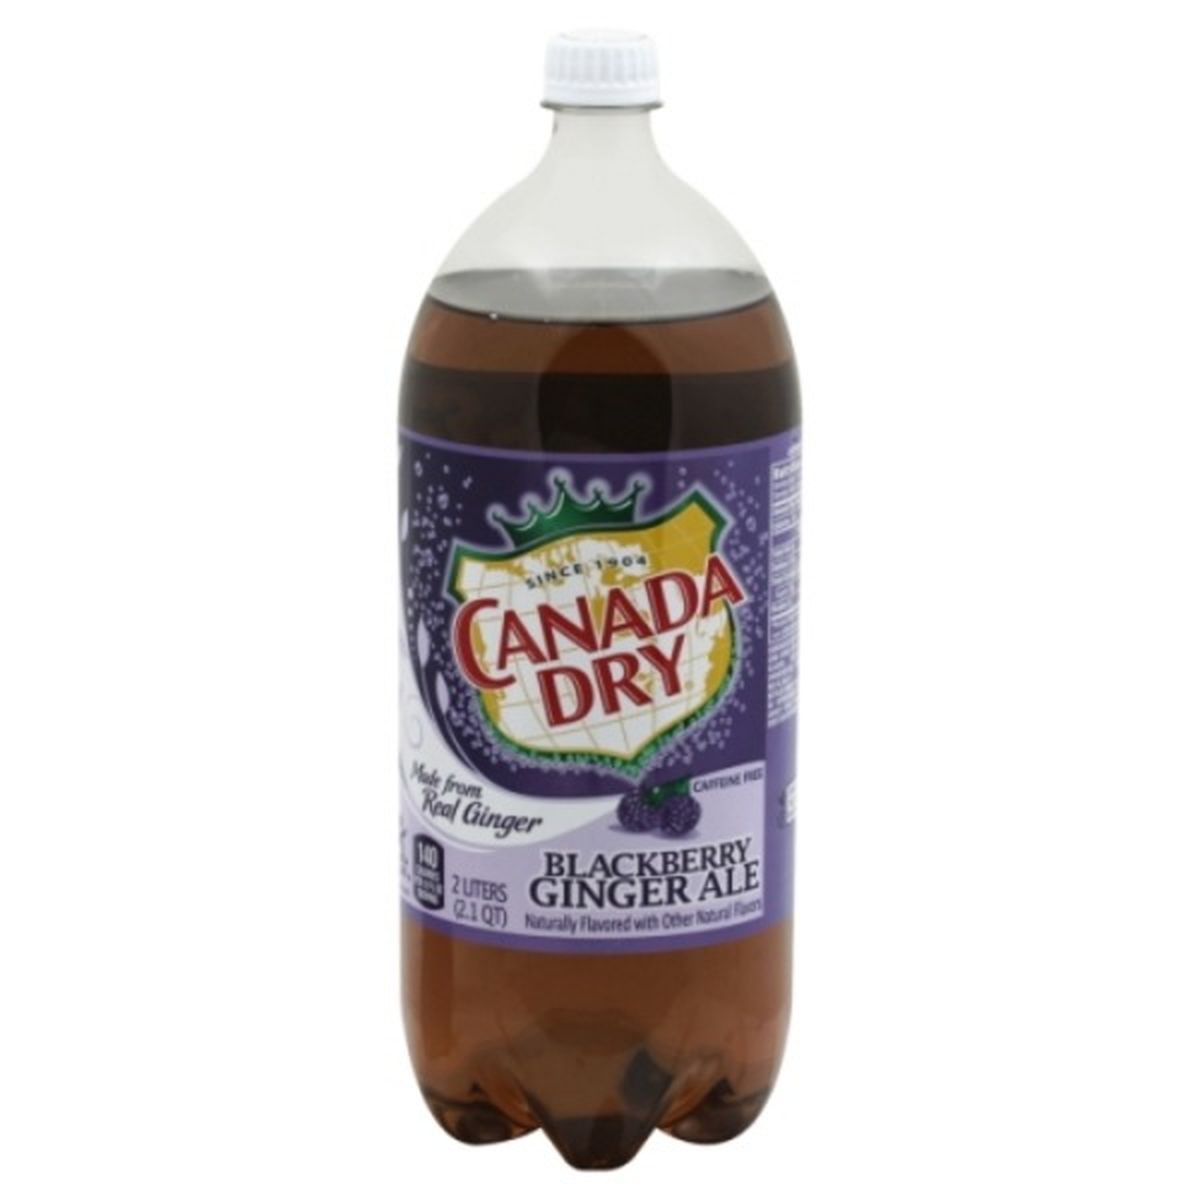 Calories in Canada Dry Ale, Ginger, Blackberry